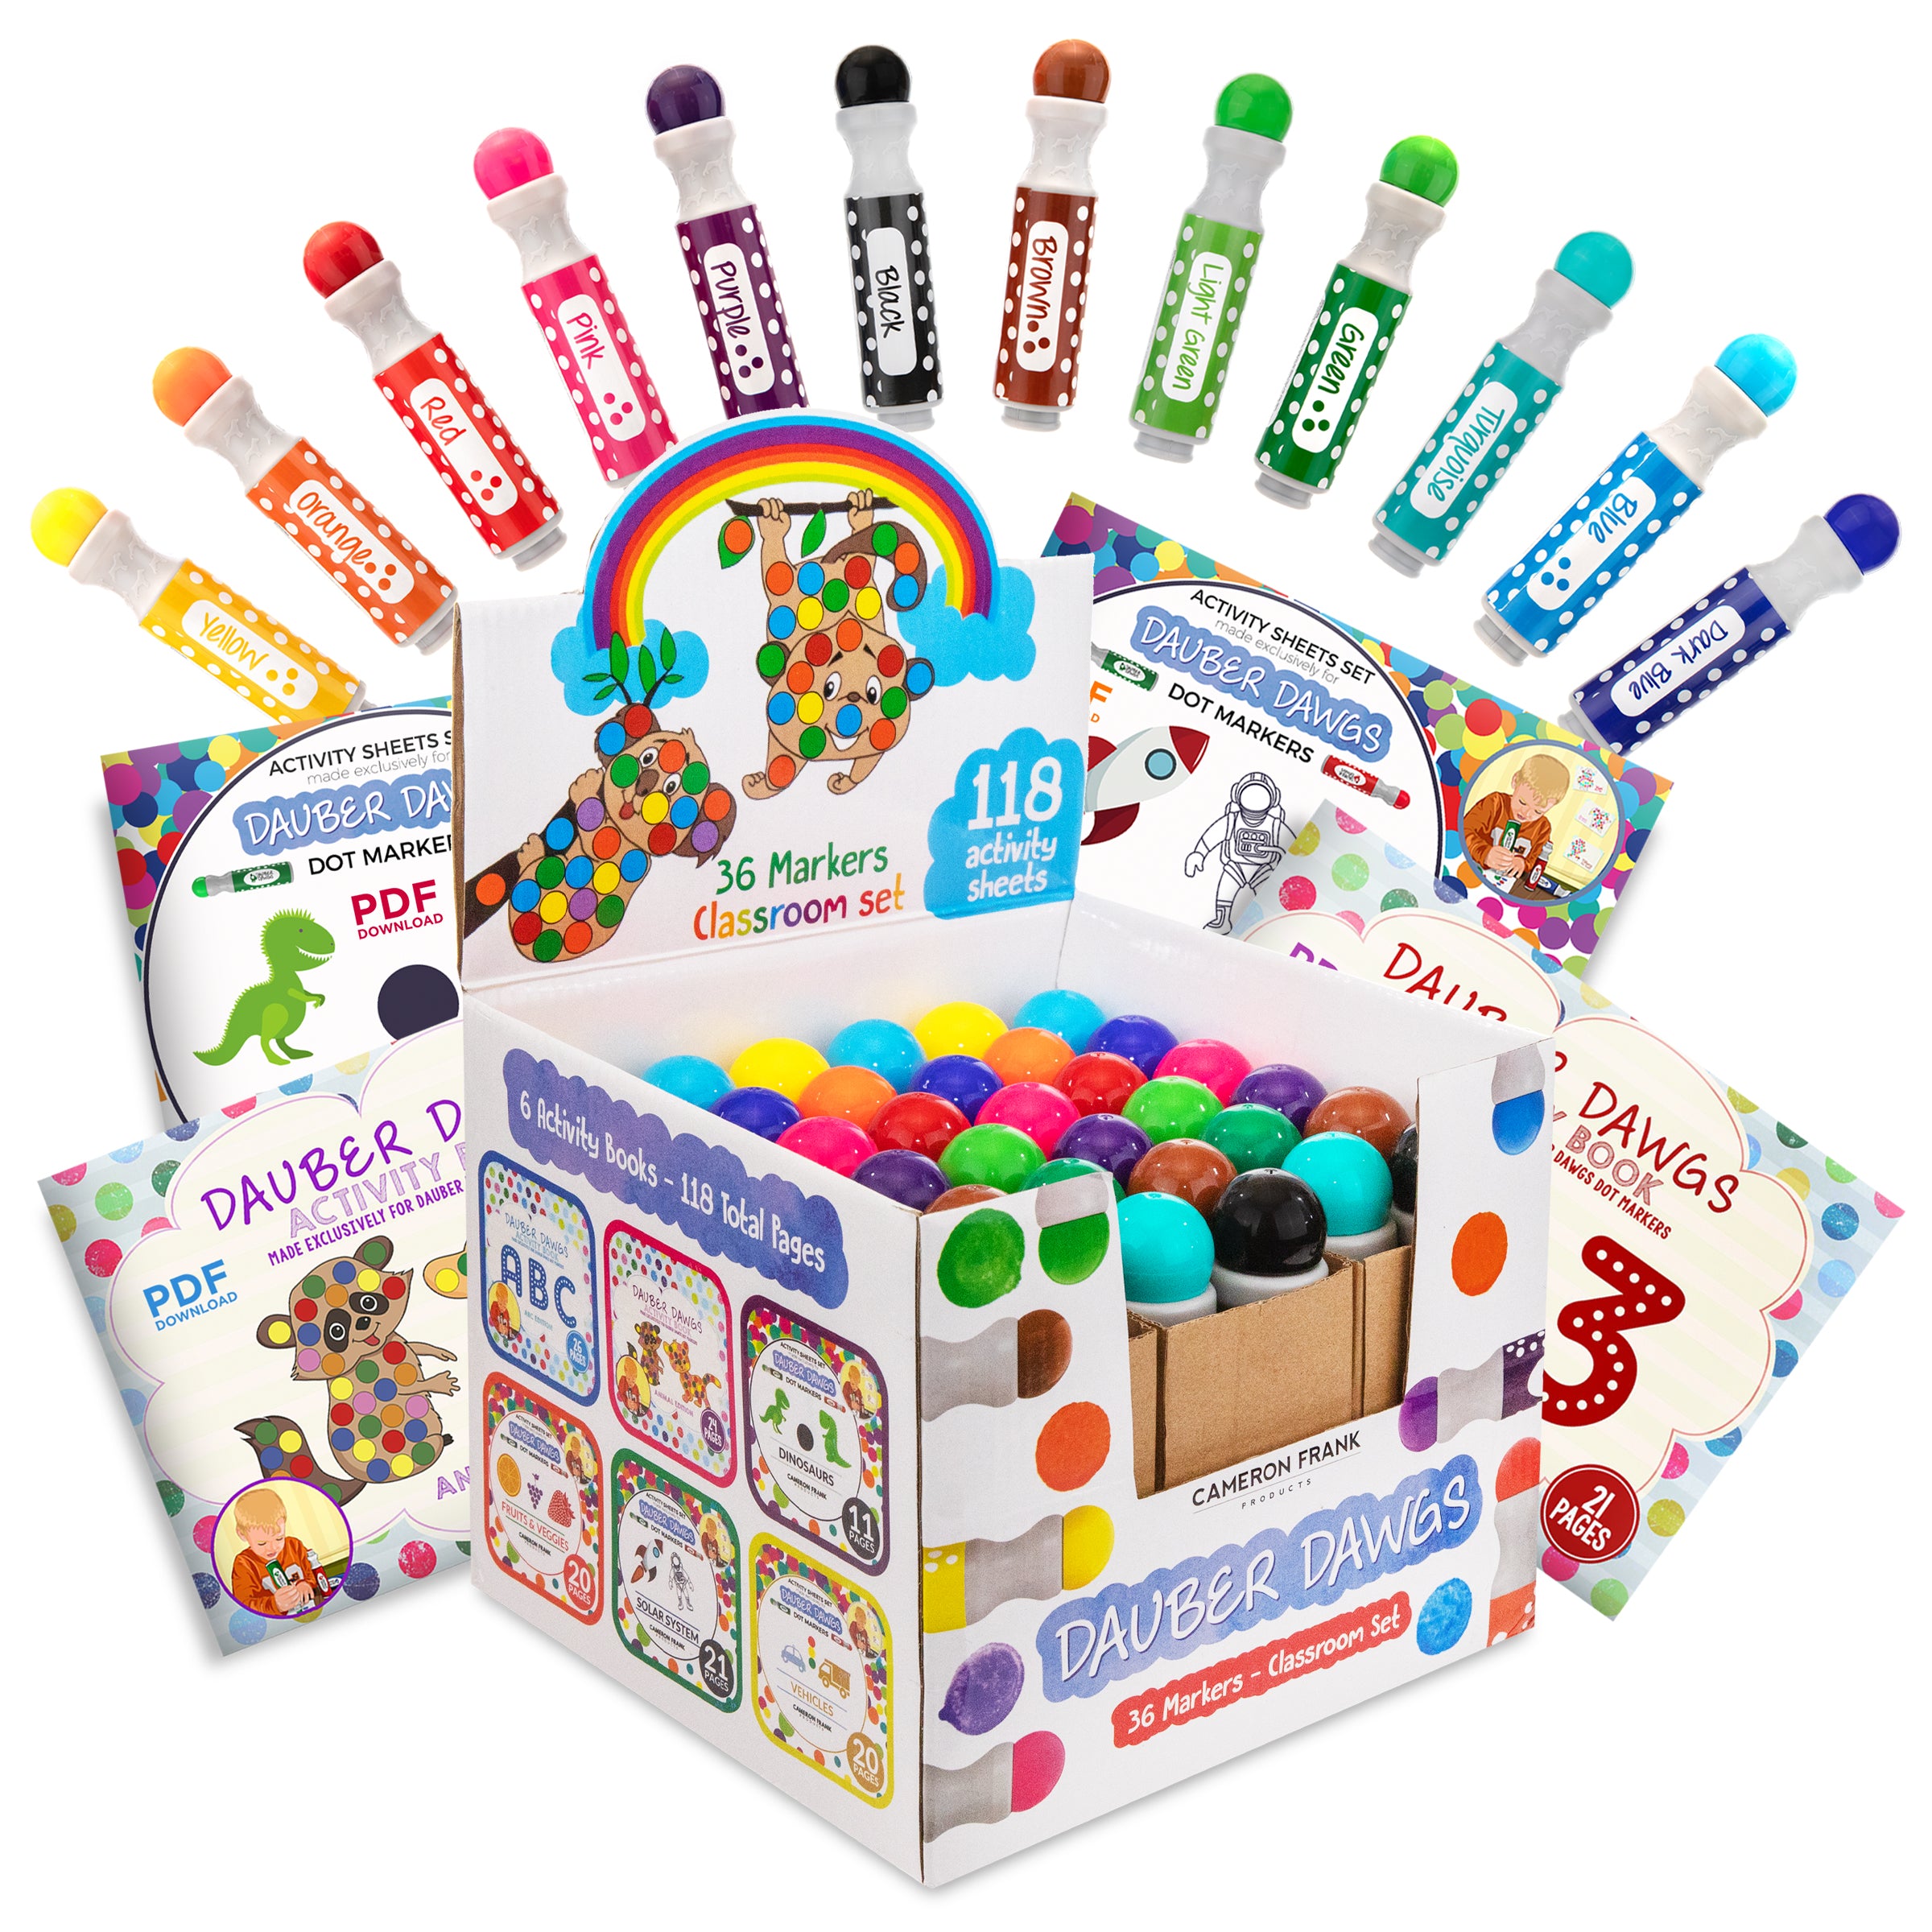 Cameron Frank Products Dot Markers for Toddlers 1-3 - Set of 8